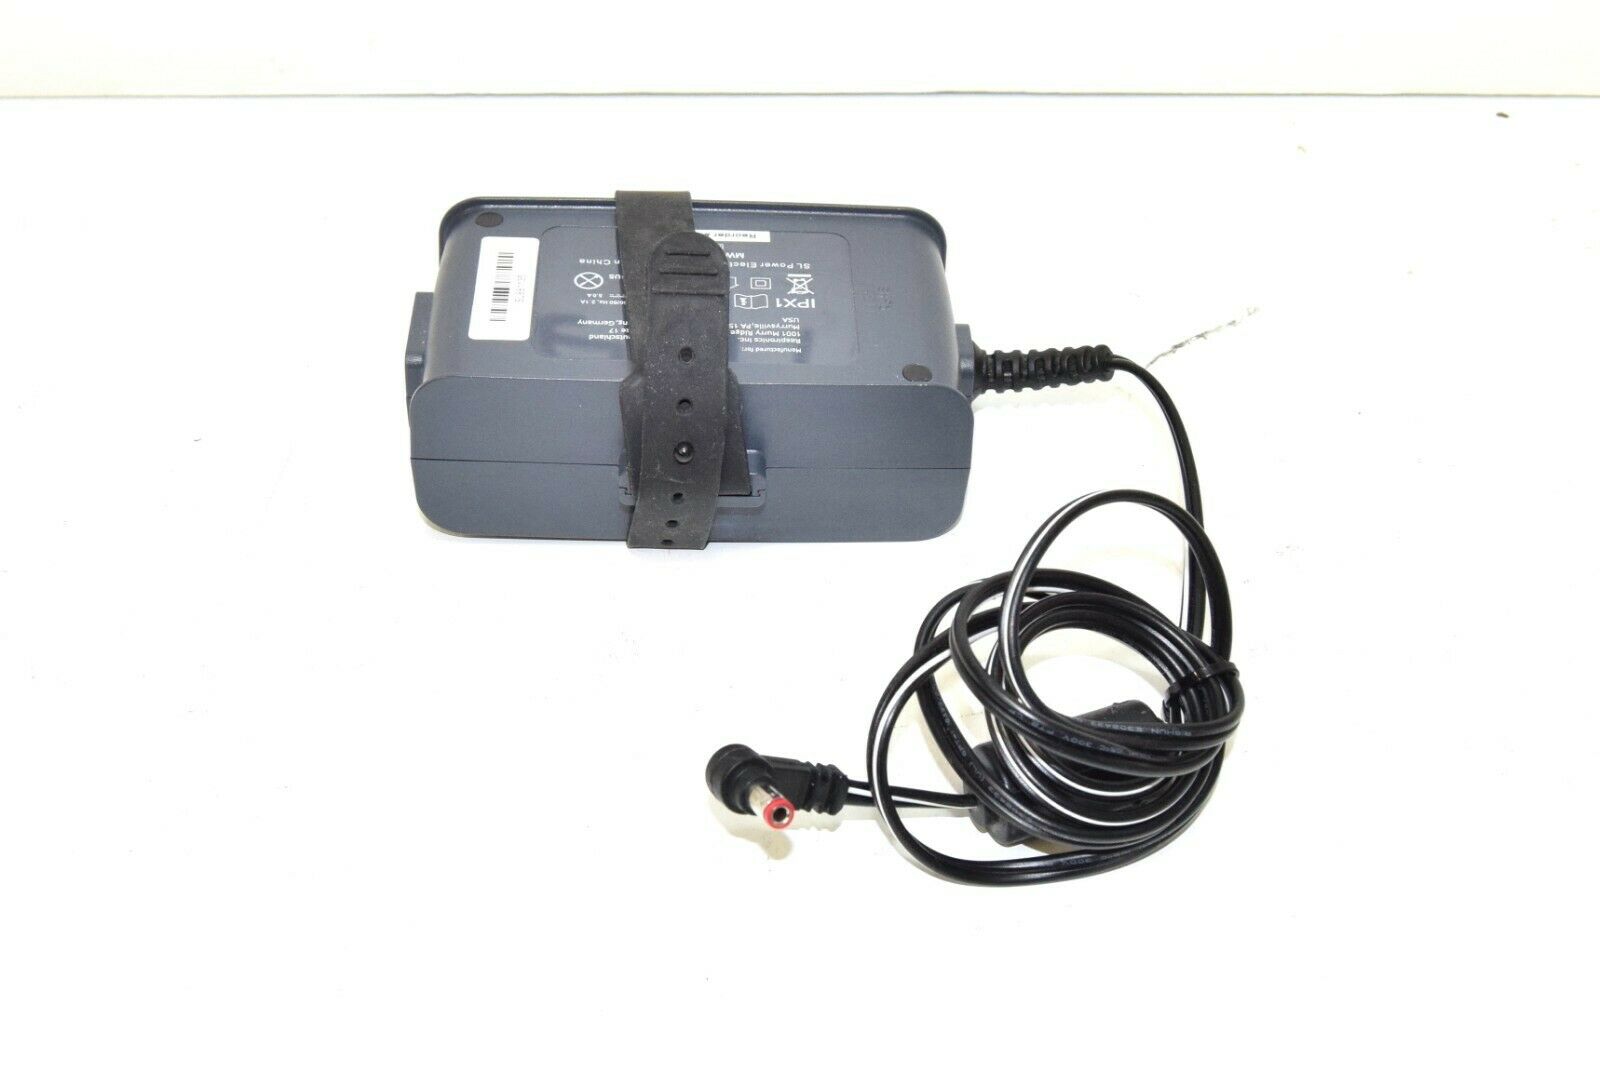 Adapter For Respironics 12V AC Adapter Ref 1058190 (Genuine Product) Compatible B